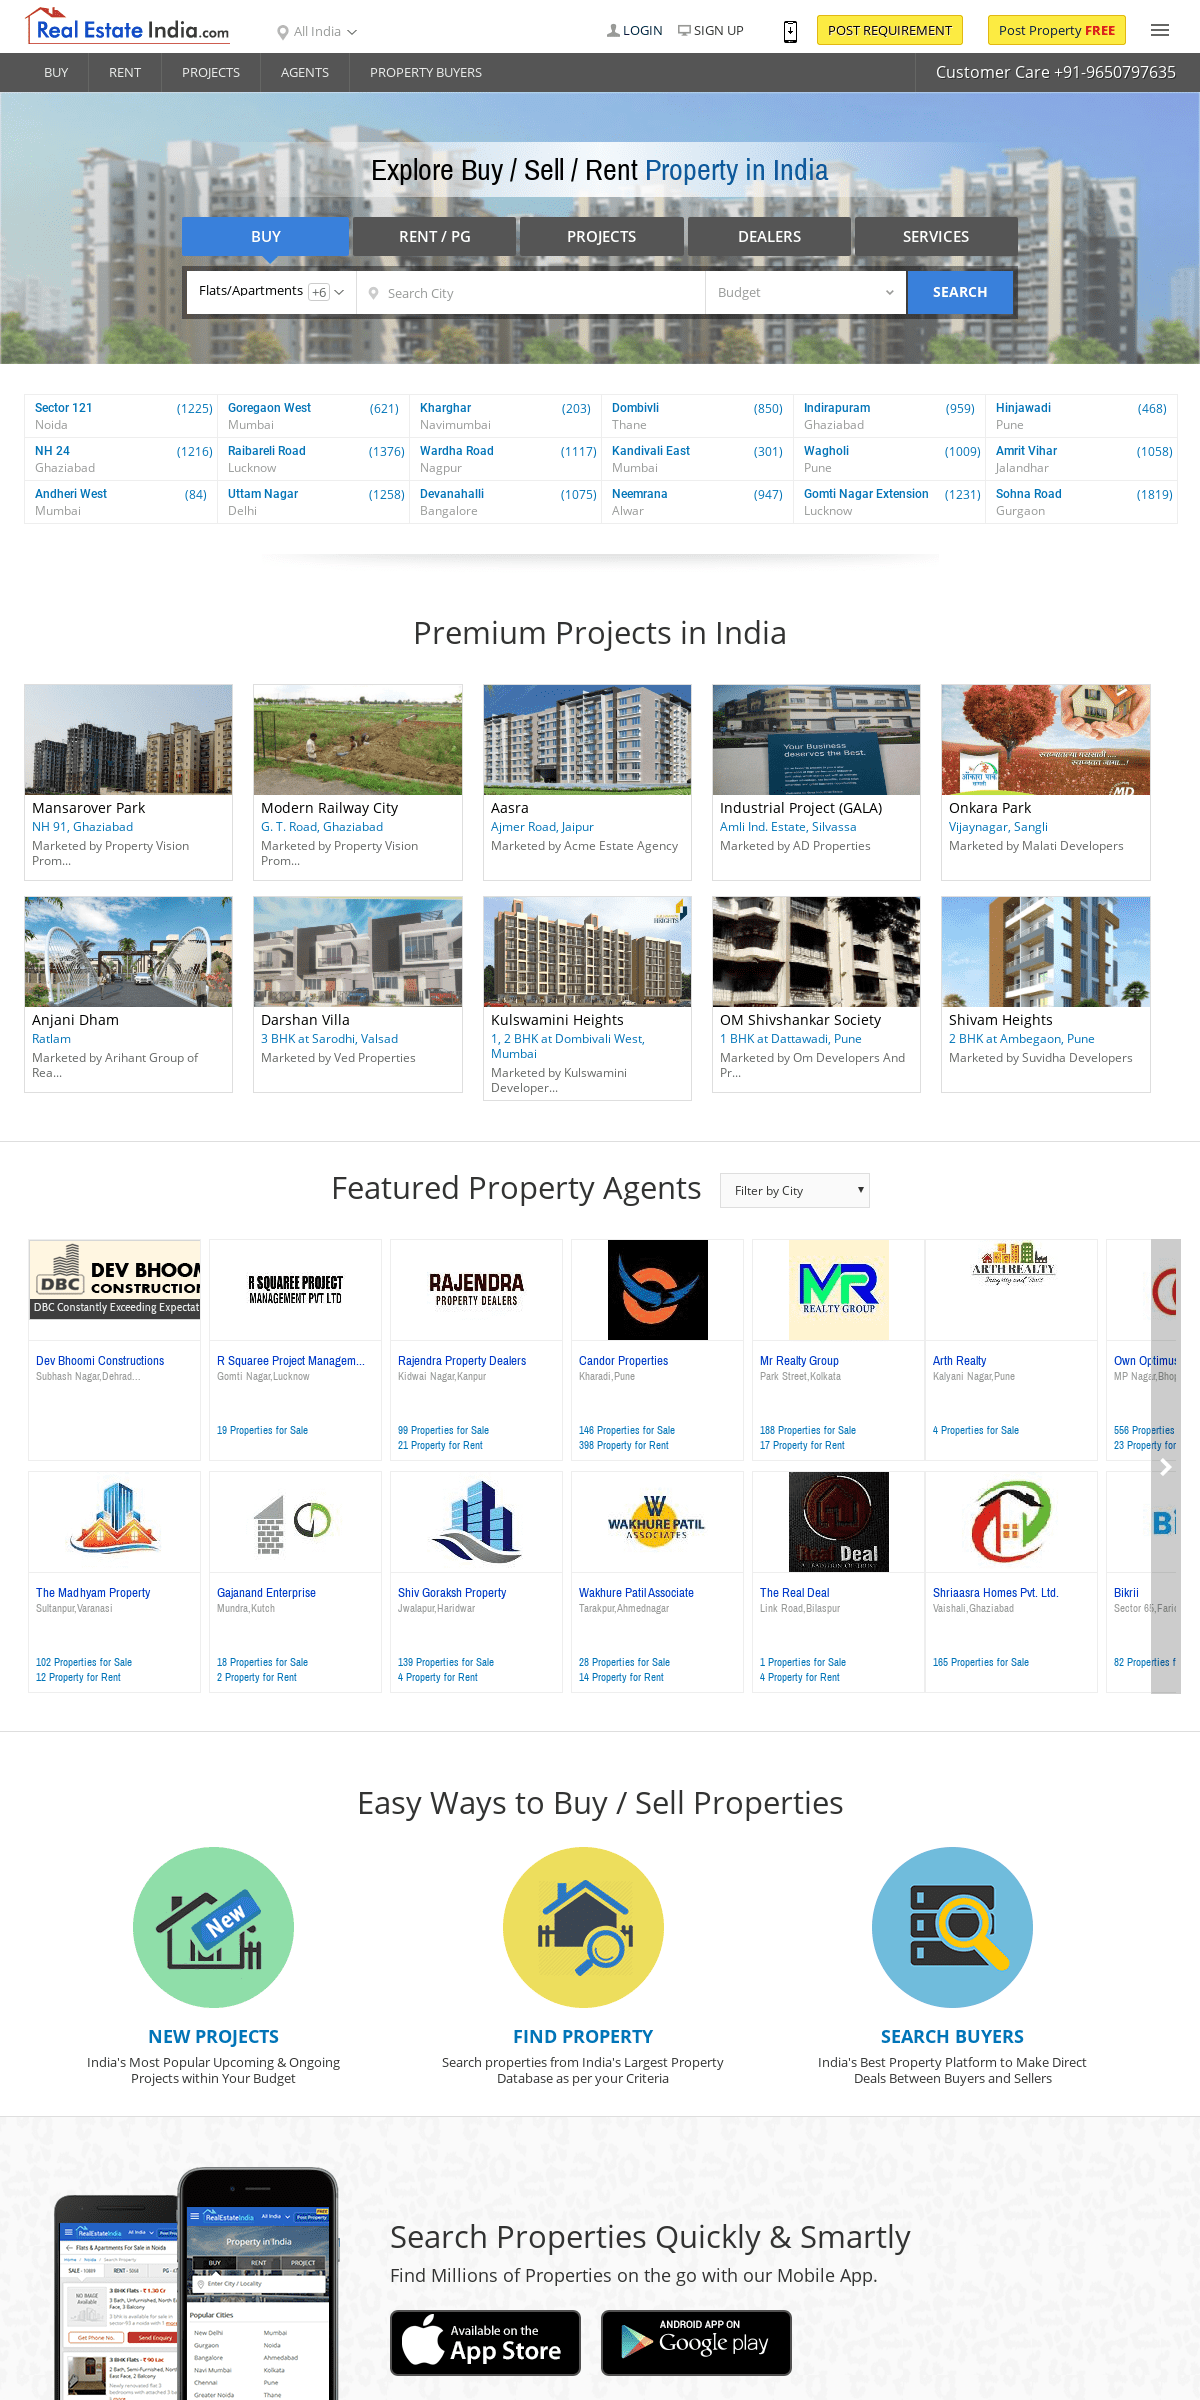 A complete backup of realestateindia.com